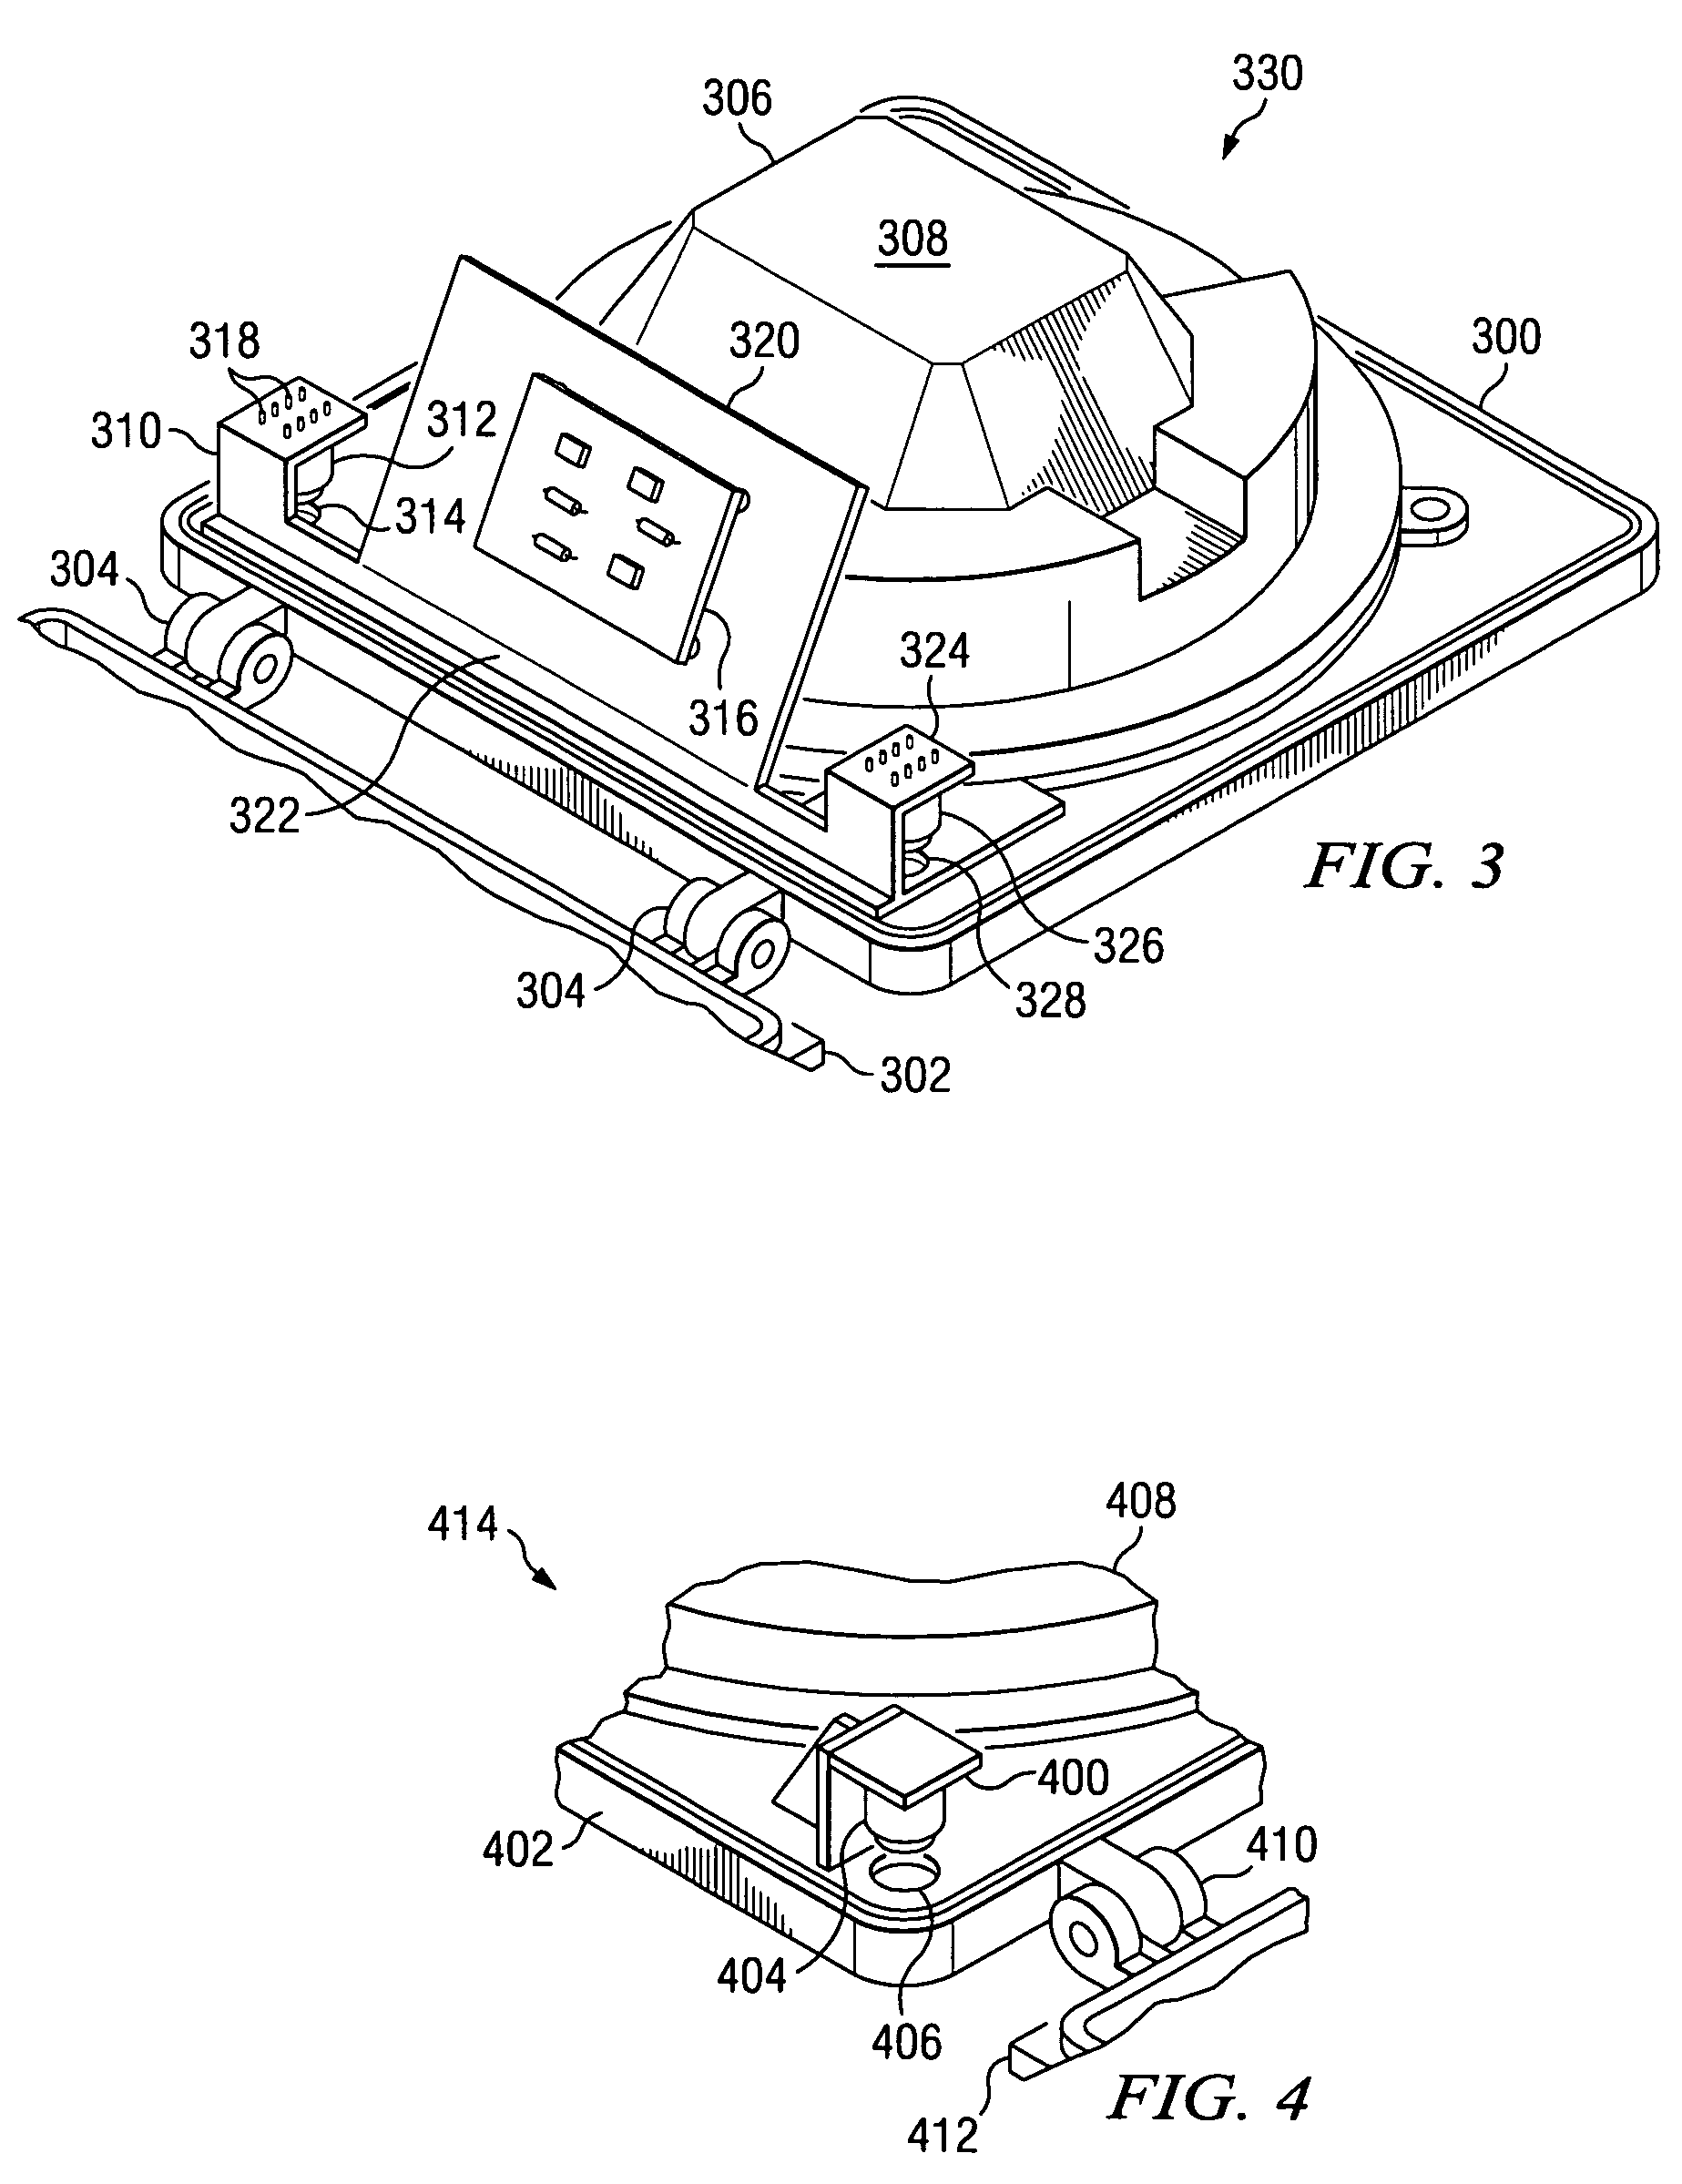 Traffic signal with integrated sensors